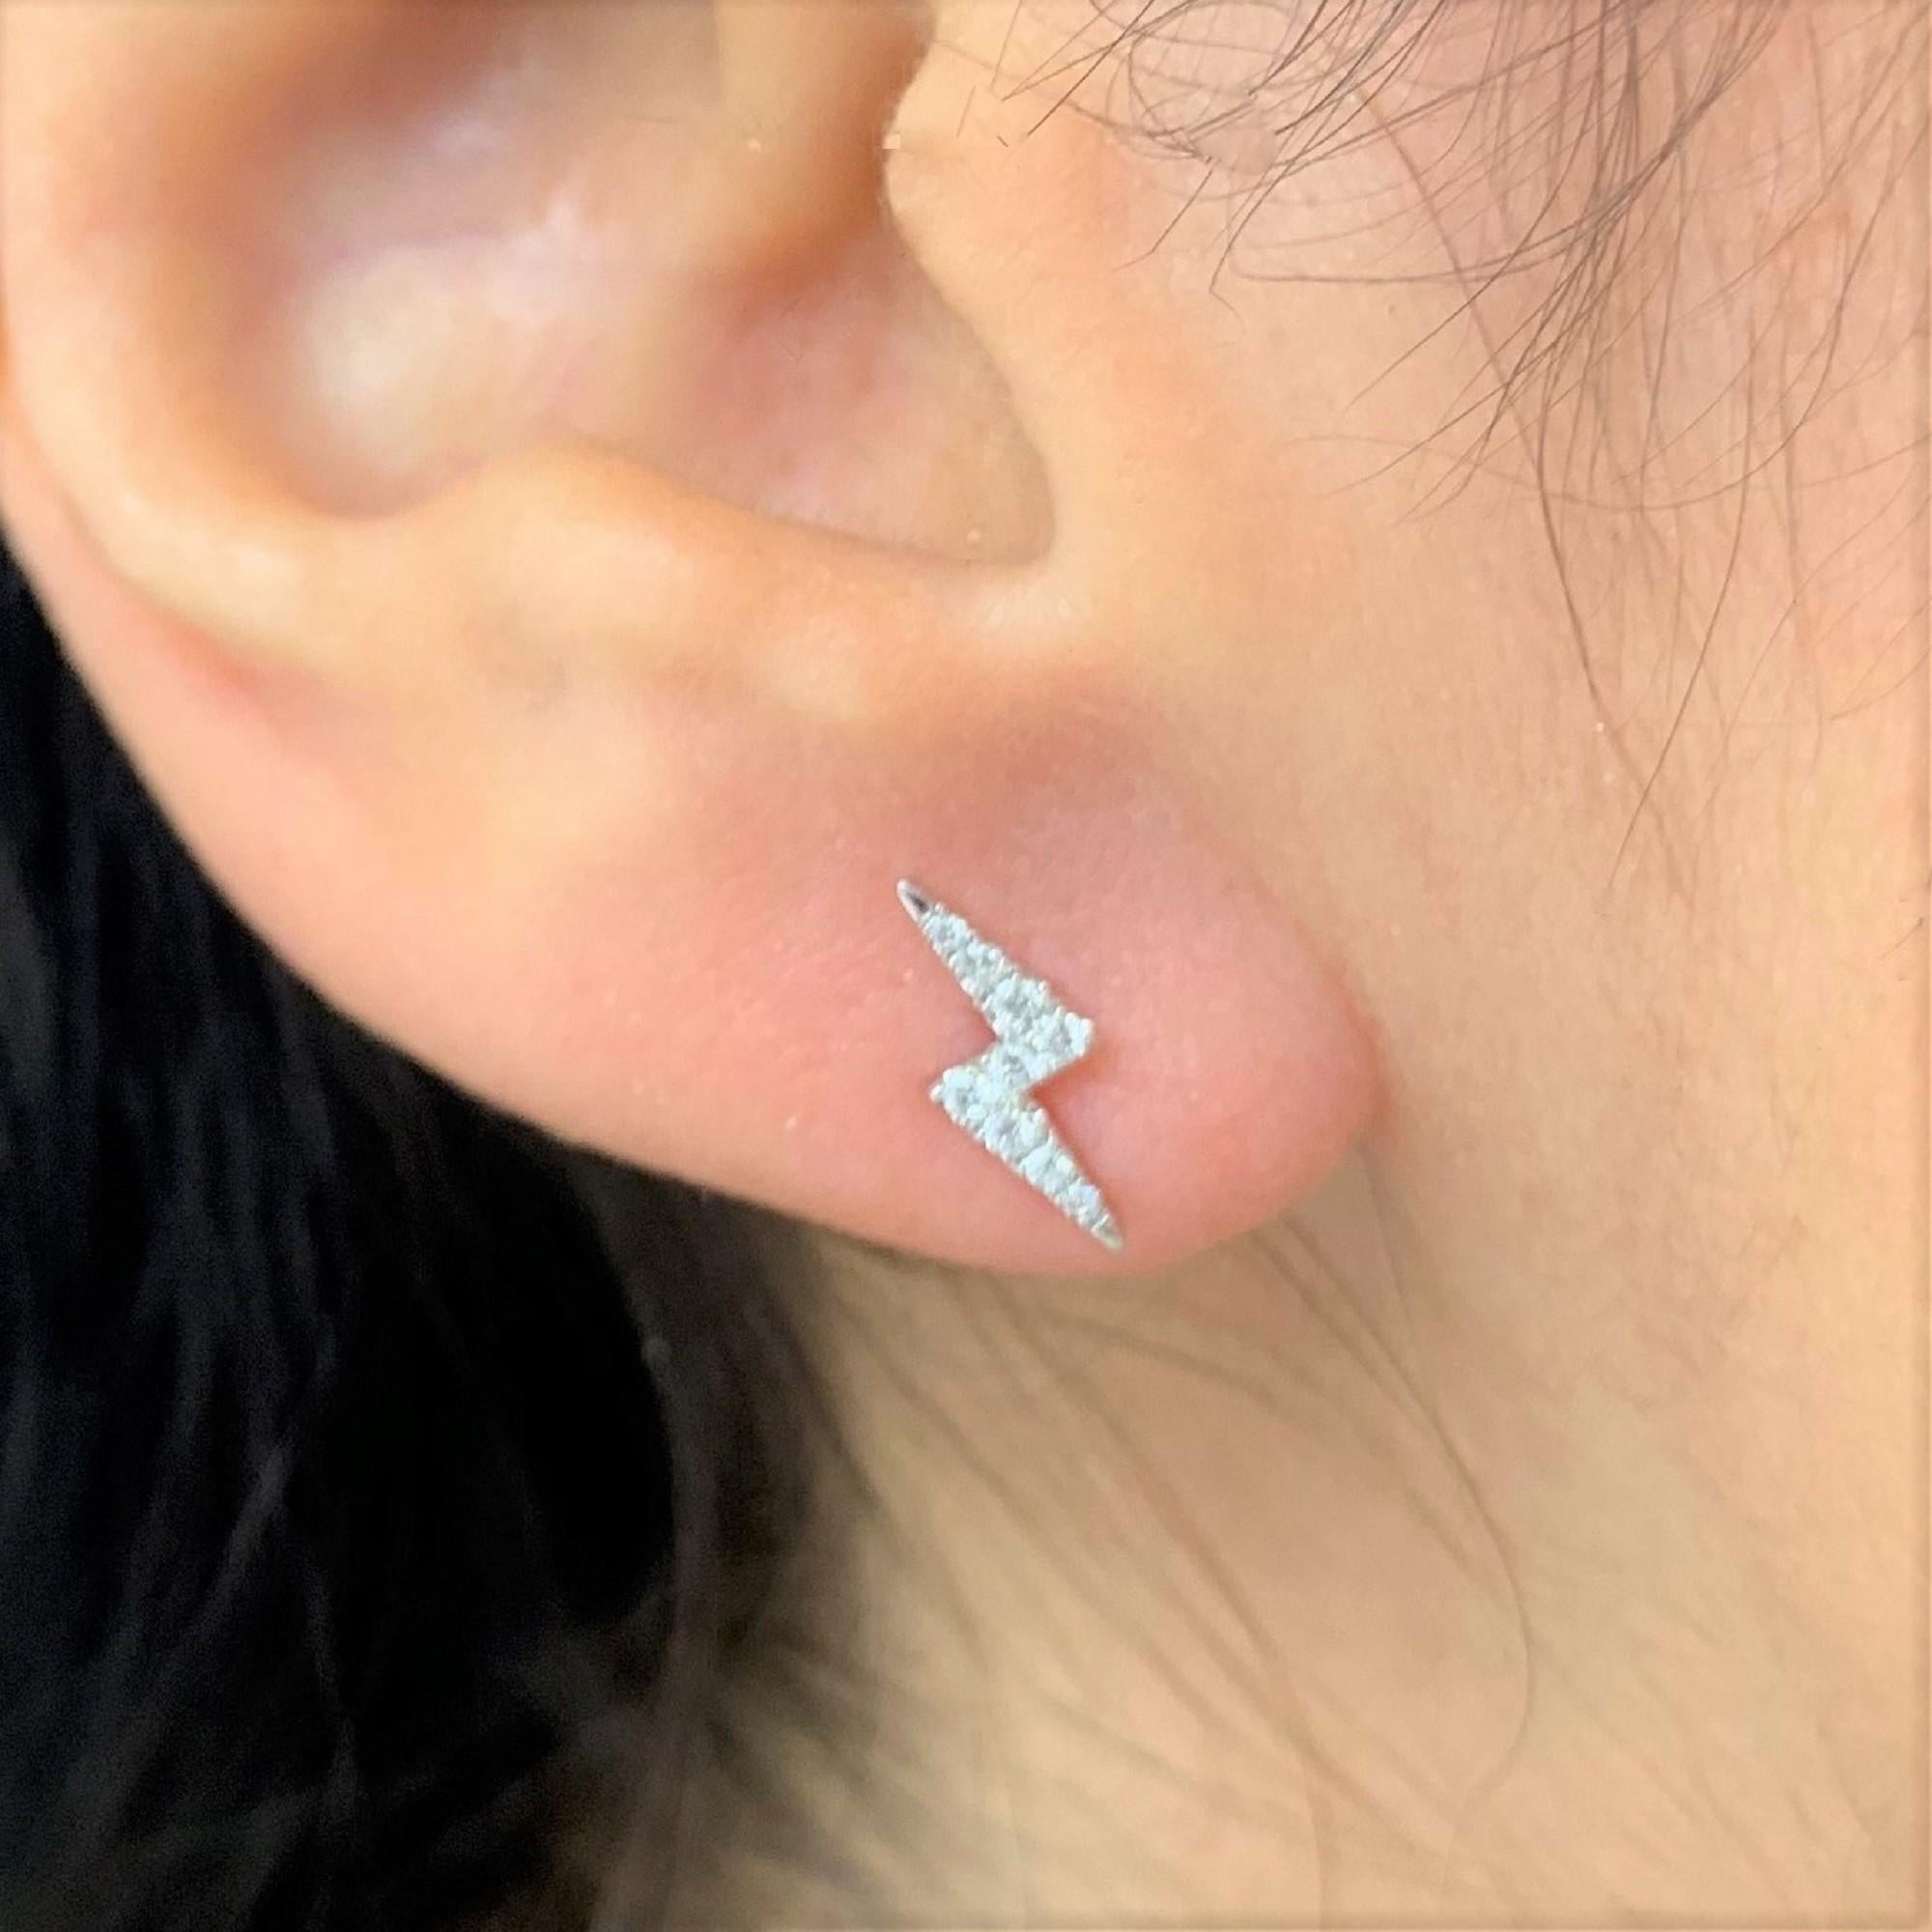 Show off your unique style with these striking lightning bolt earrings. The earrings are crafted in 14k gold and feature approximately 0.12 ct of natural white diamonds, available in white, yellow and rose gold. The earrings are secured with